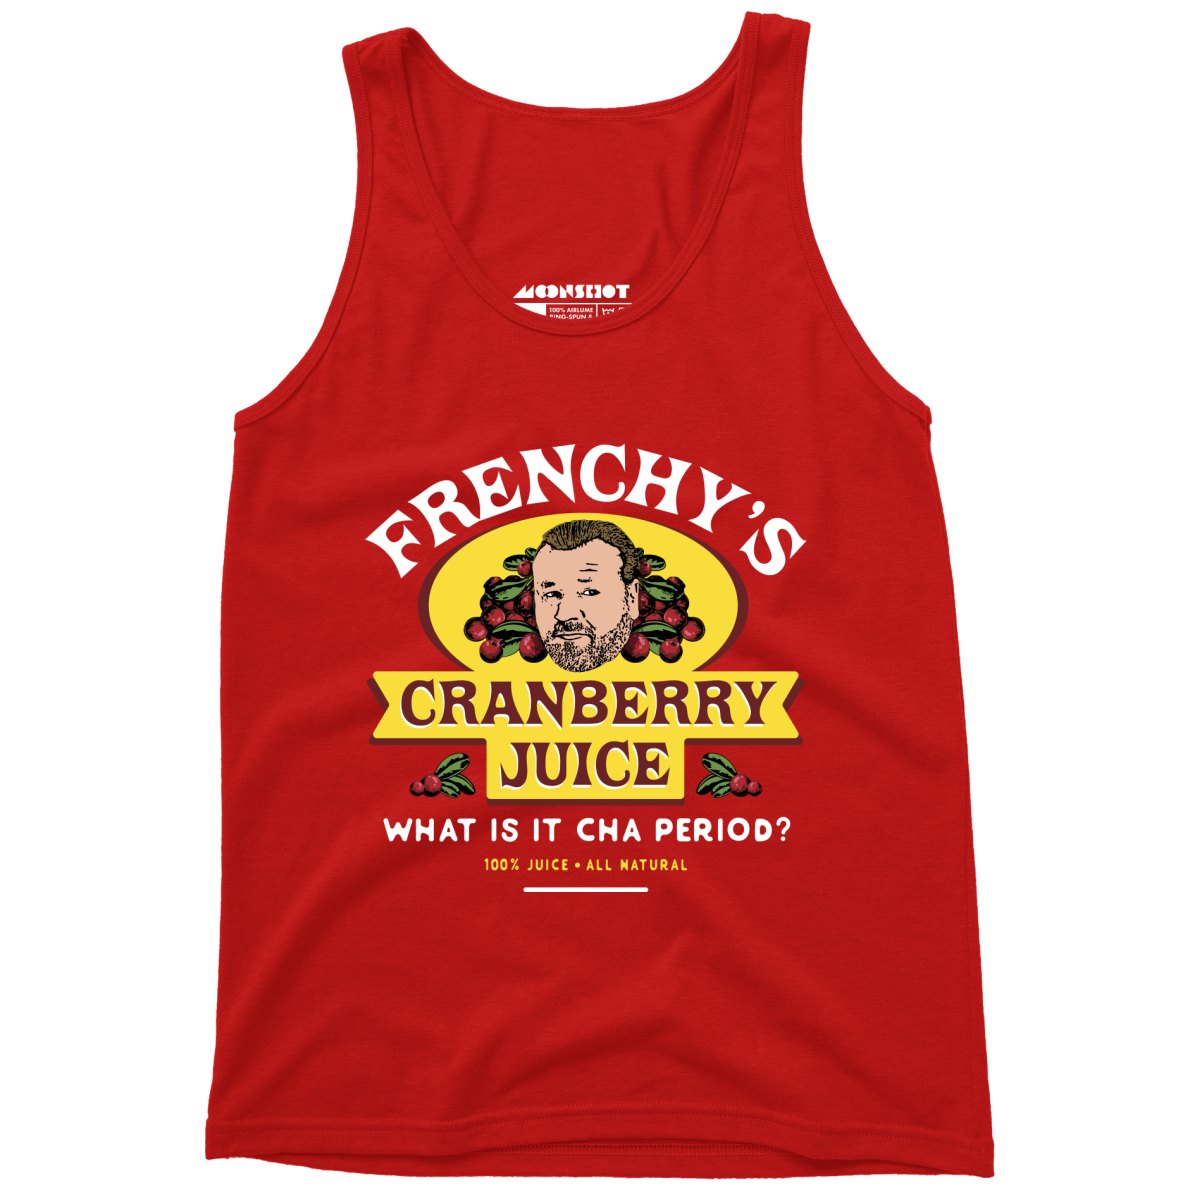 Frenchy's Cranberry Juice - The Departed - Unisex Tank Top